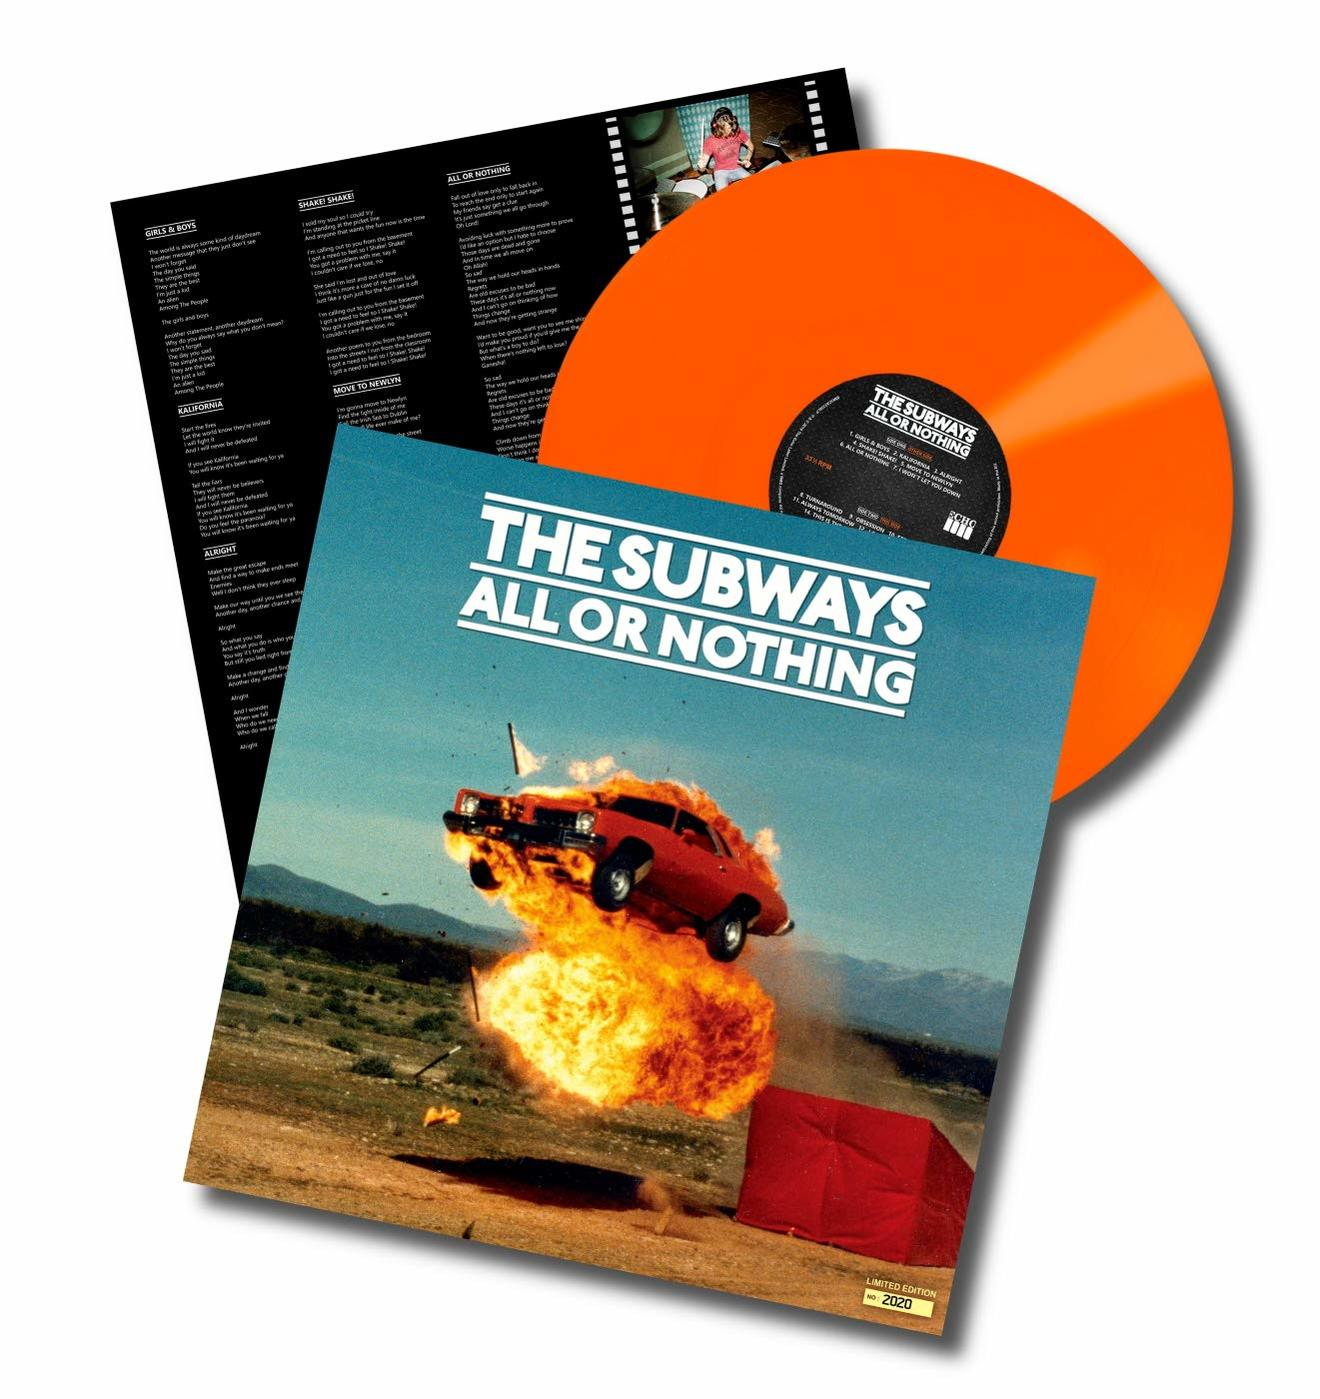 The Subways OR EDITION) (ANNIVERSARY NOTHING (Vinyl) - - ALL